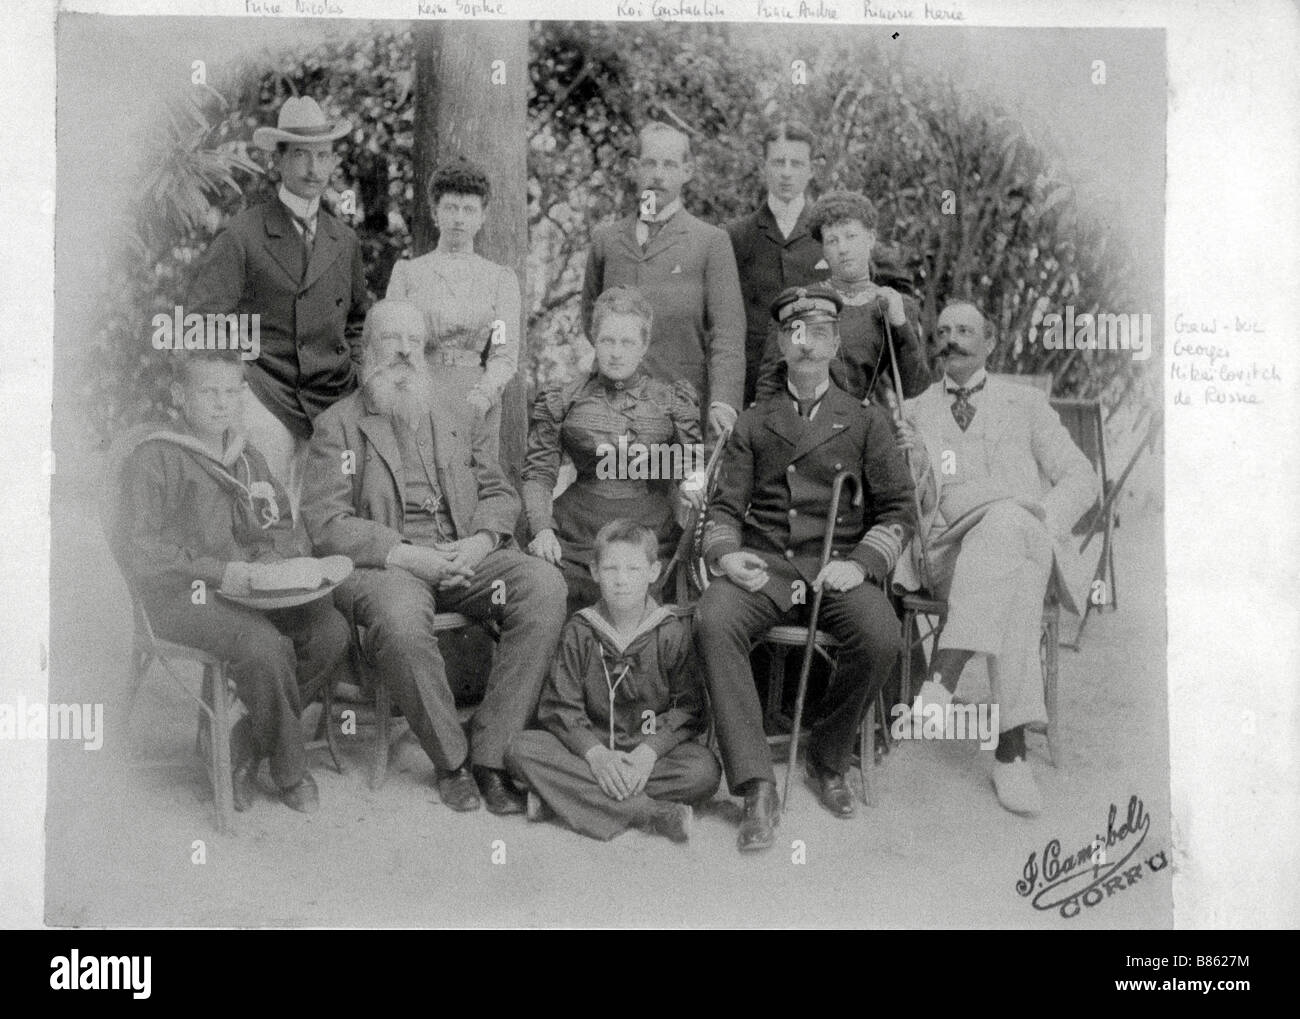 Prince Christopher, Queen Olga, Prince George (George II), King George I, Prince Nicholas, Queen Sophia, King Constantine, Prince Andrew, Princess Maria and Grand Duke George Mikhailovich of Russia Stock Photo